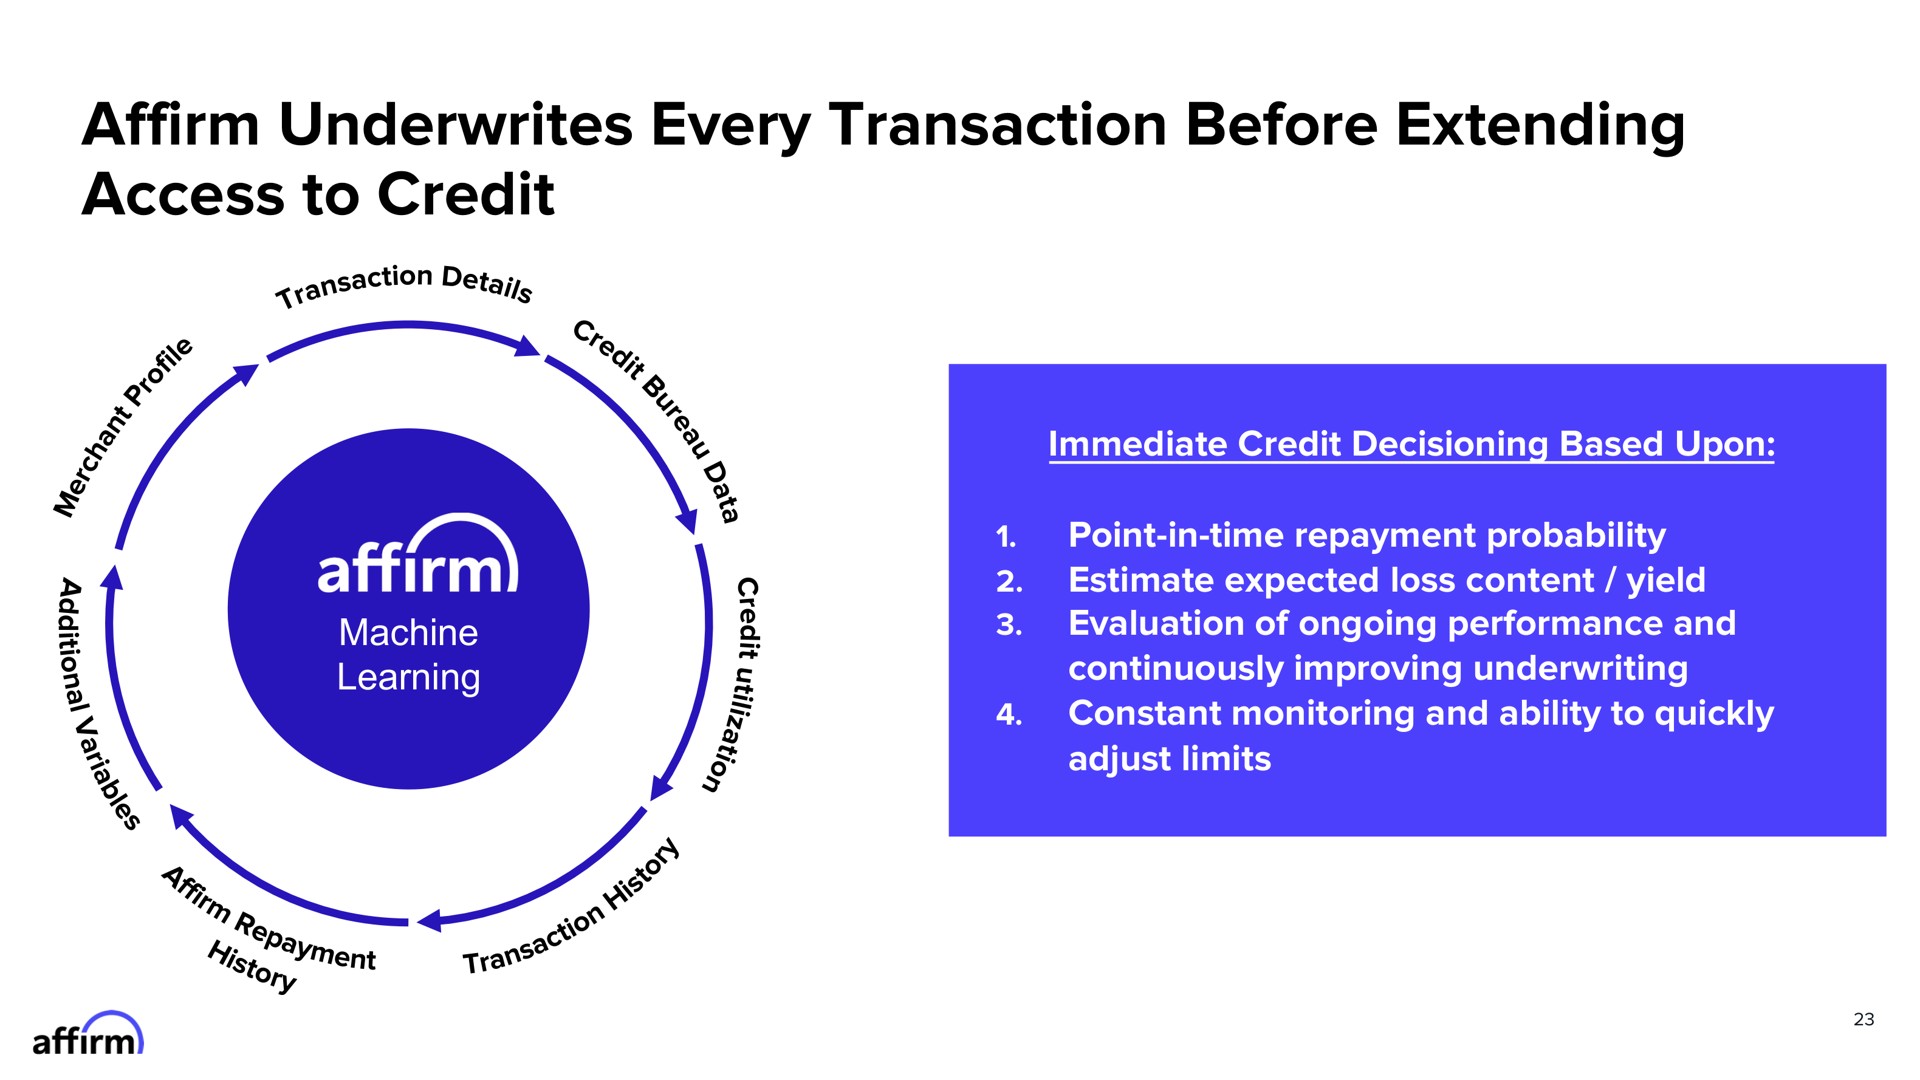 affirm underwrites every transaction before extending access to credit | Affirm